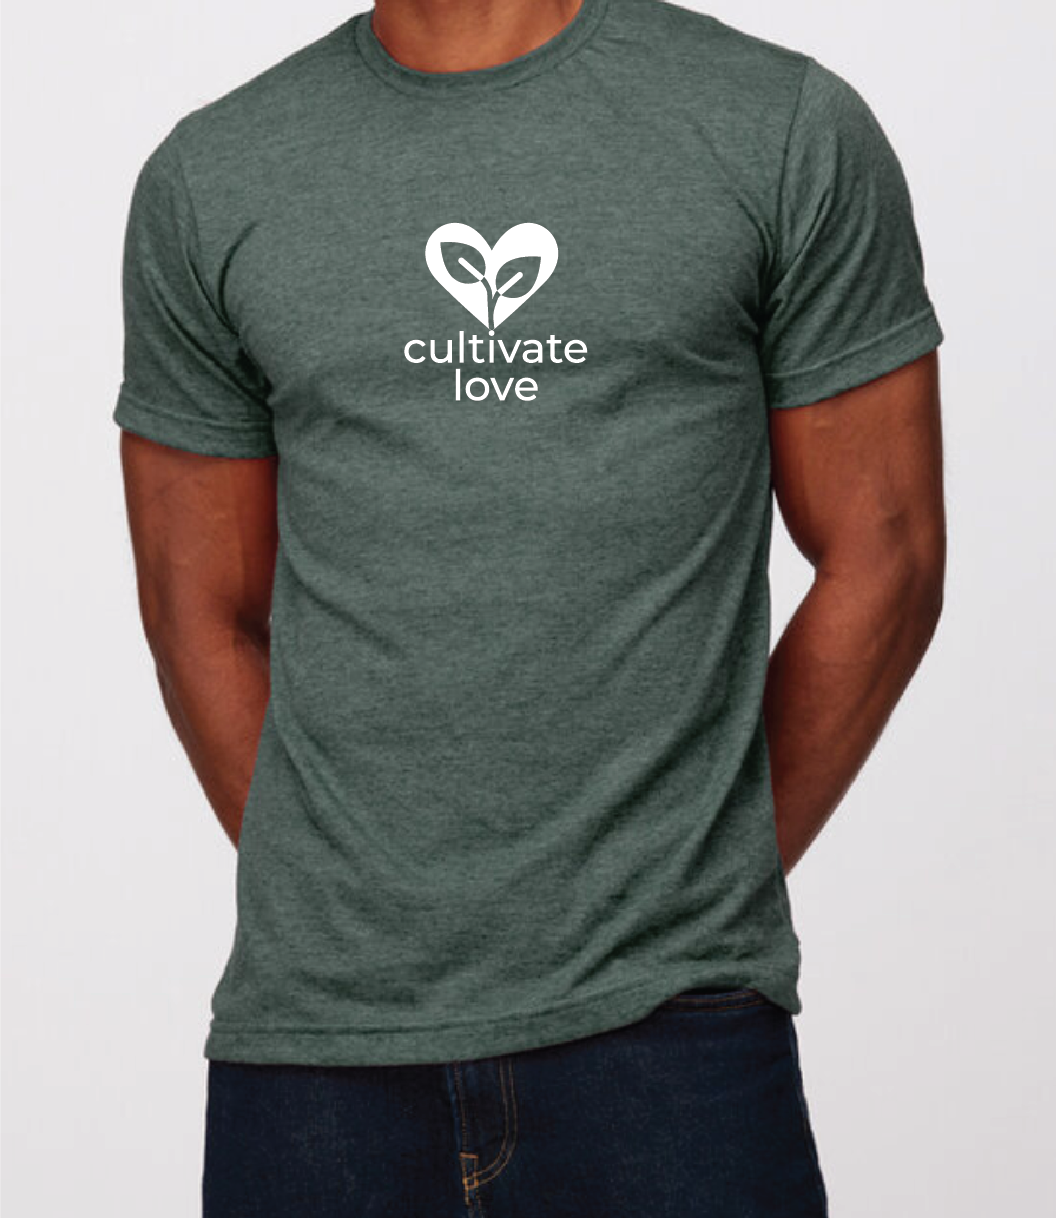 Cultivate Love tee